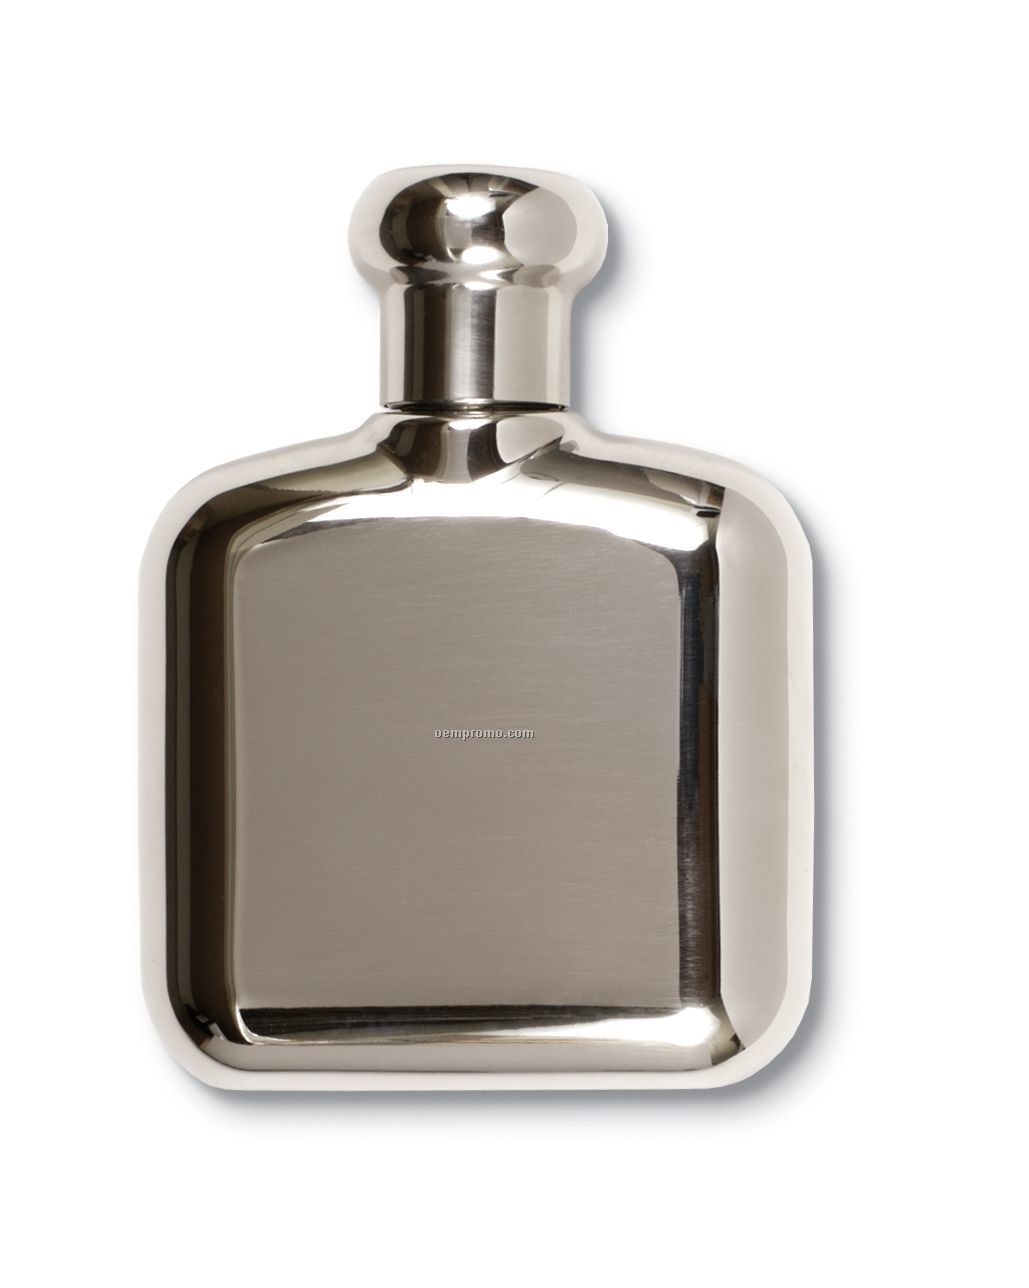 Squire's Flask